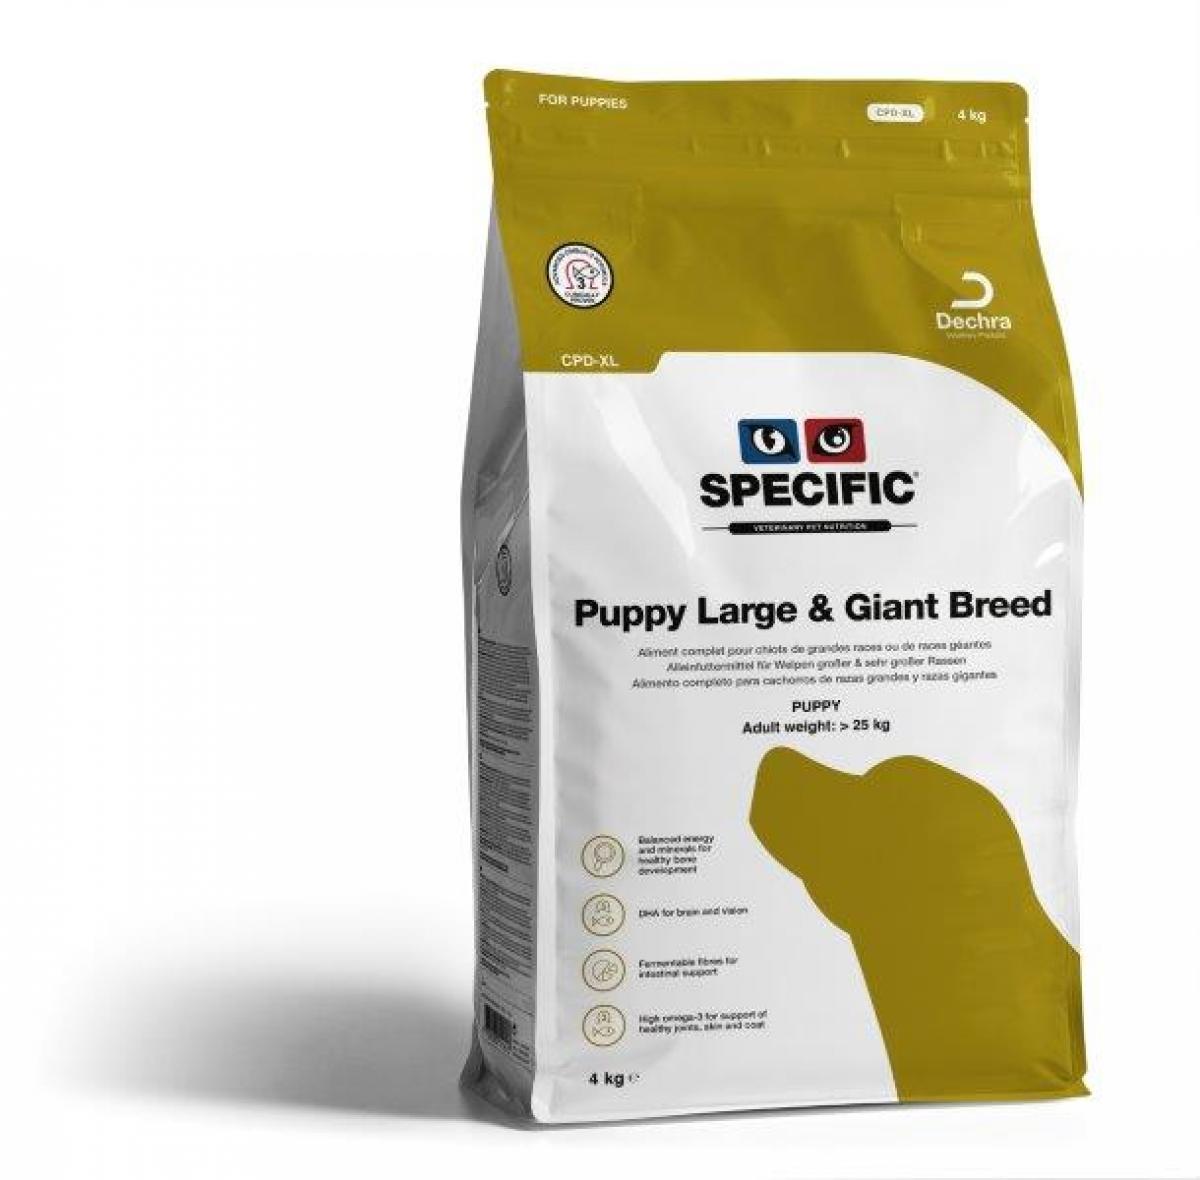 Specific CPD-XL Puppy large & giant breed 4kg